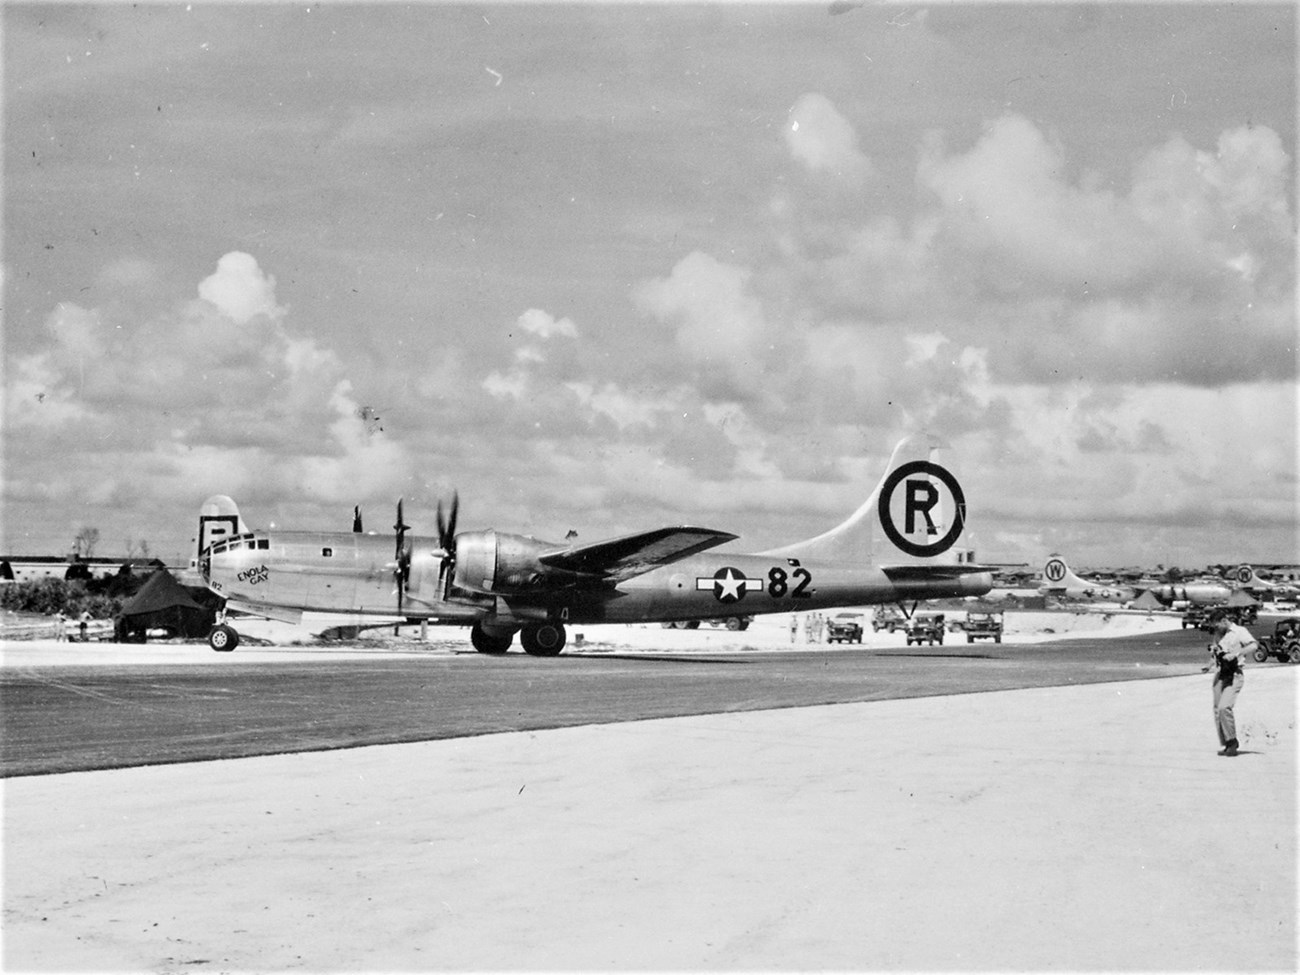 Large metallic plane with propellers on sandy runway, various military vehicles surrounding it.